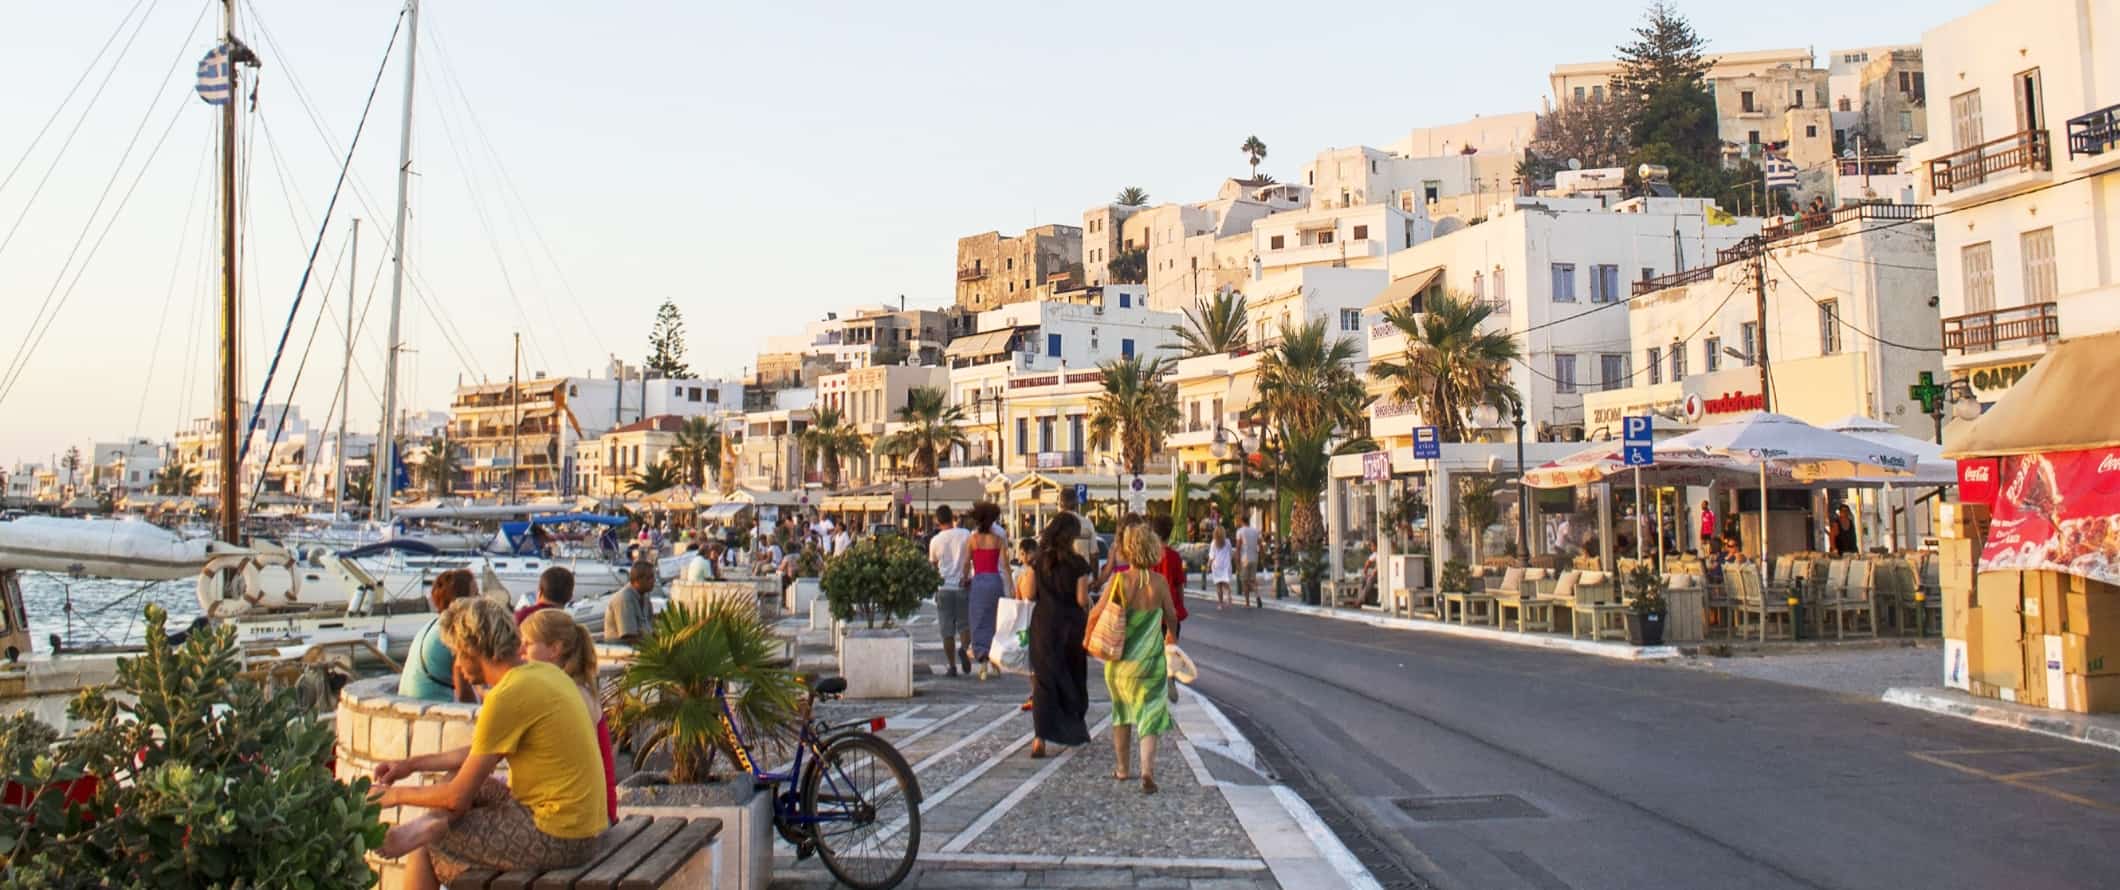 People sitting on benches and walking along the harborfront filled with sailboats, and Chora Old Town with its whitewashed buildings in the background on the island of Naxos in Greece.